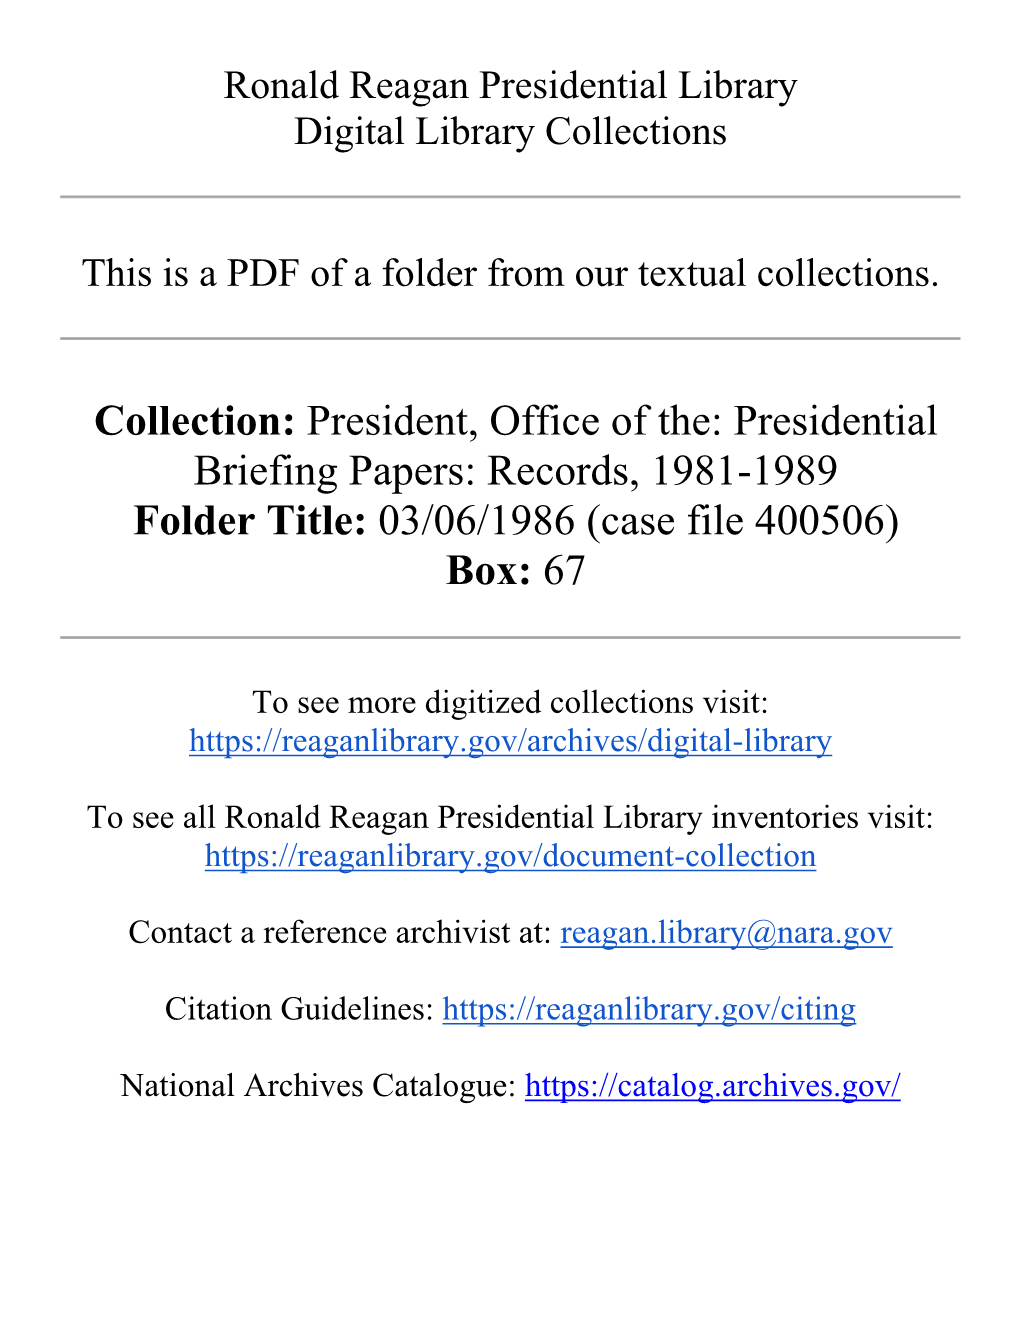 Collection: President, Office of The: Presidential Briefing Papers: Records, 1981-1989 Folder Title: 03/06/1986 (Case File 400506) Box: 67